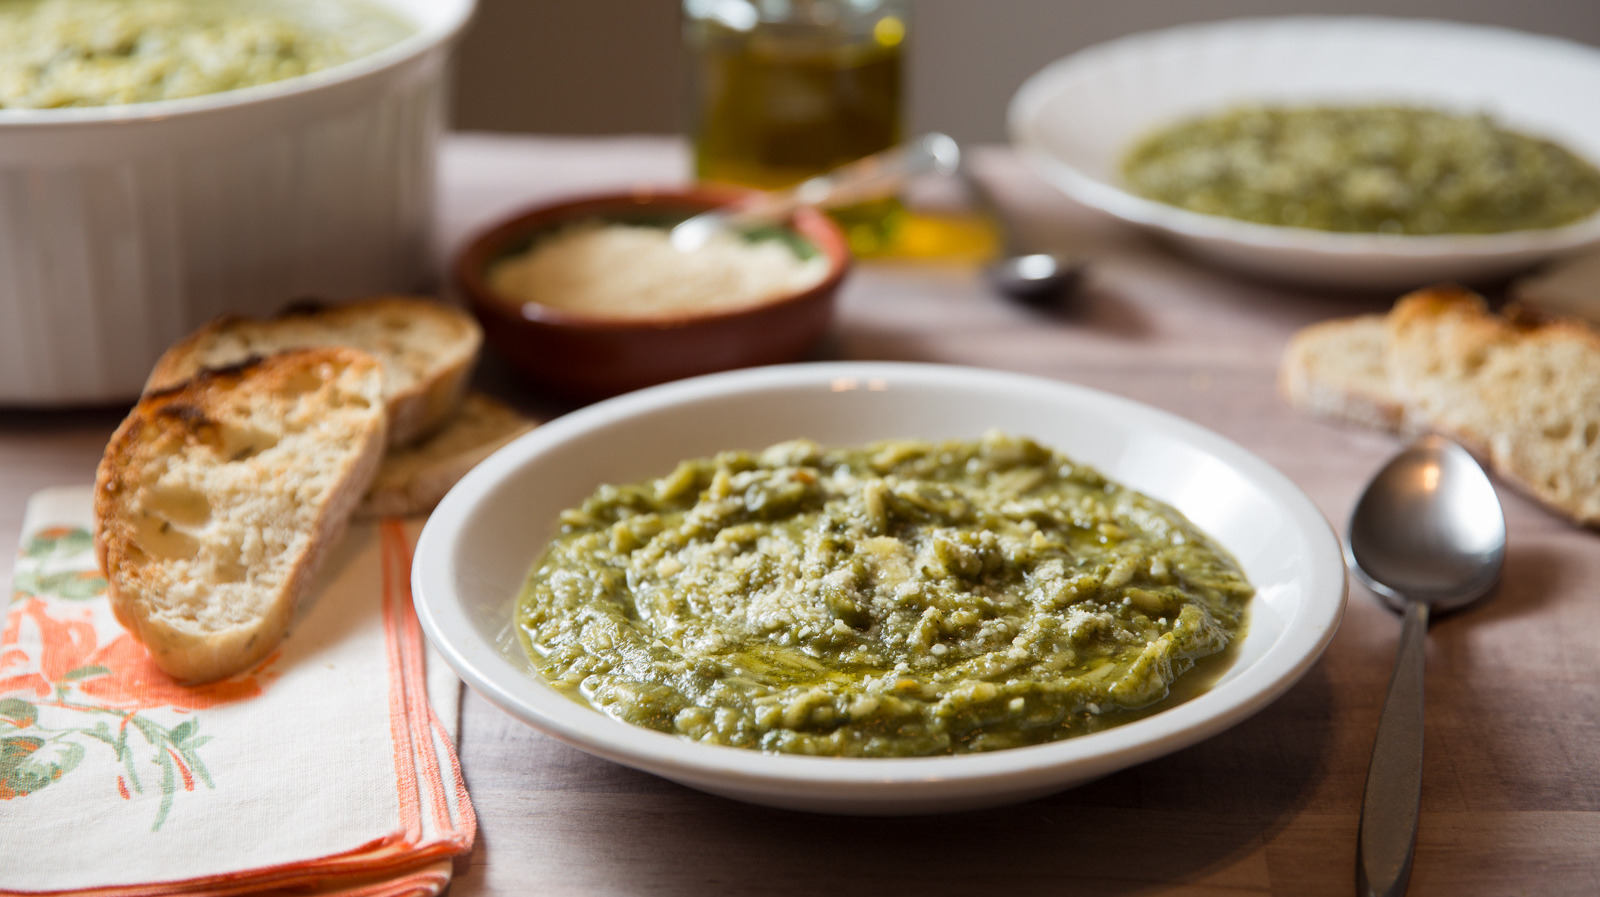 Minestra Verde Is The Comforting Italian Soup Loaded With Dark Leafy Greens